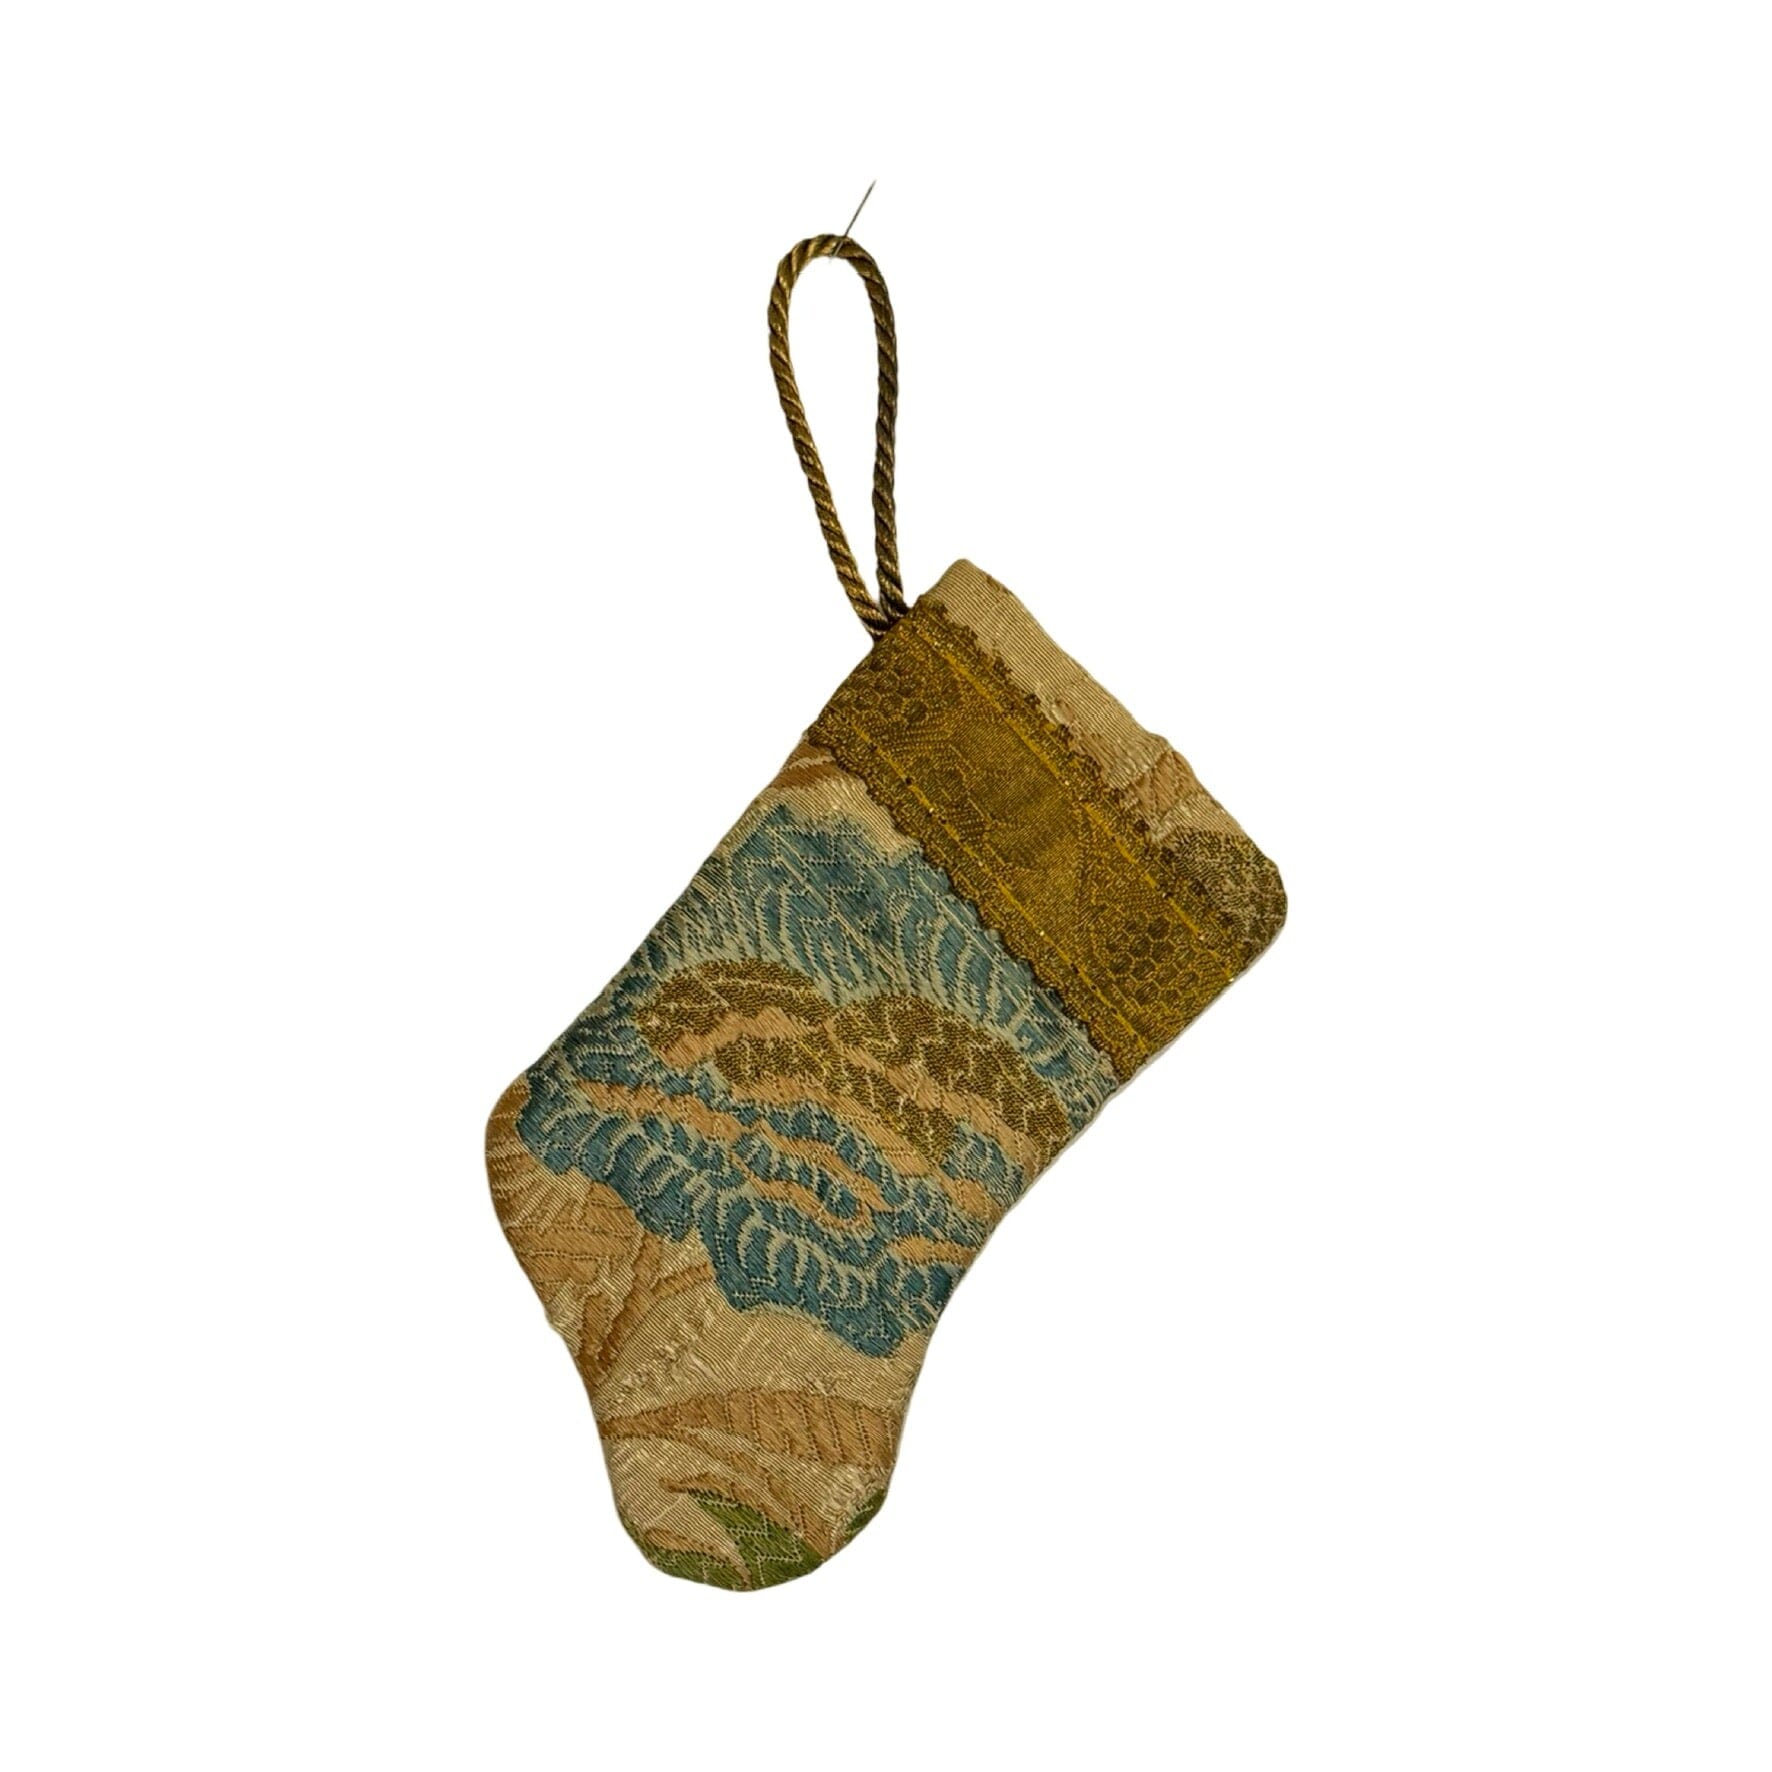 Handmade Mini Stocking Made From Vintage Fabric and Trims- Champagne Embroidery Ornament B. Viz Design G 